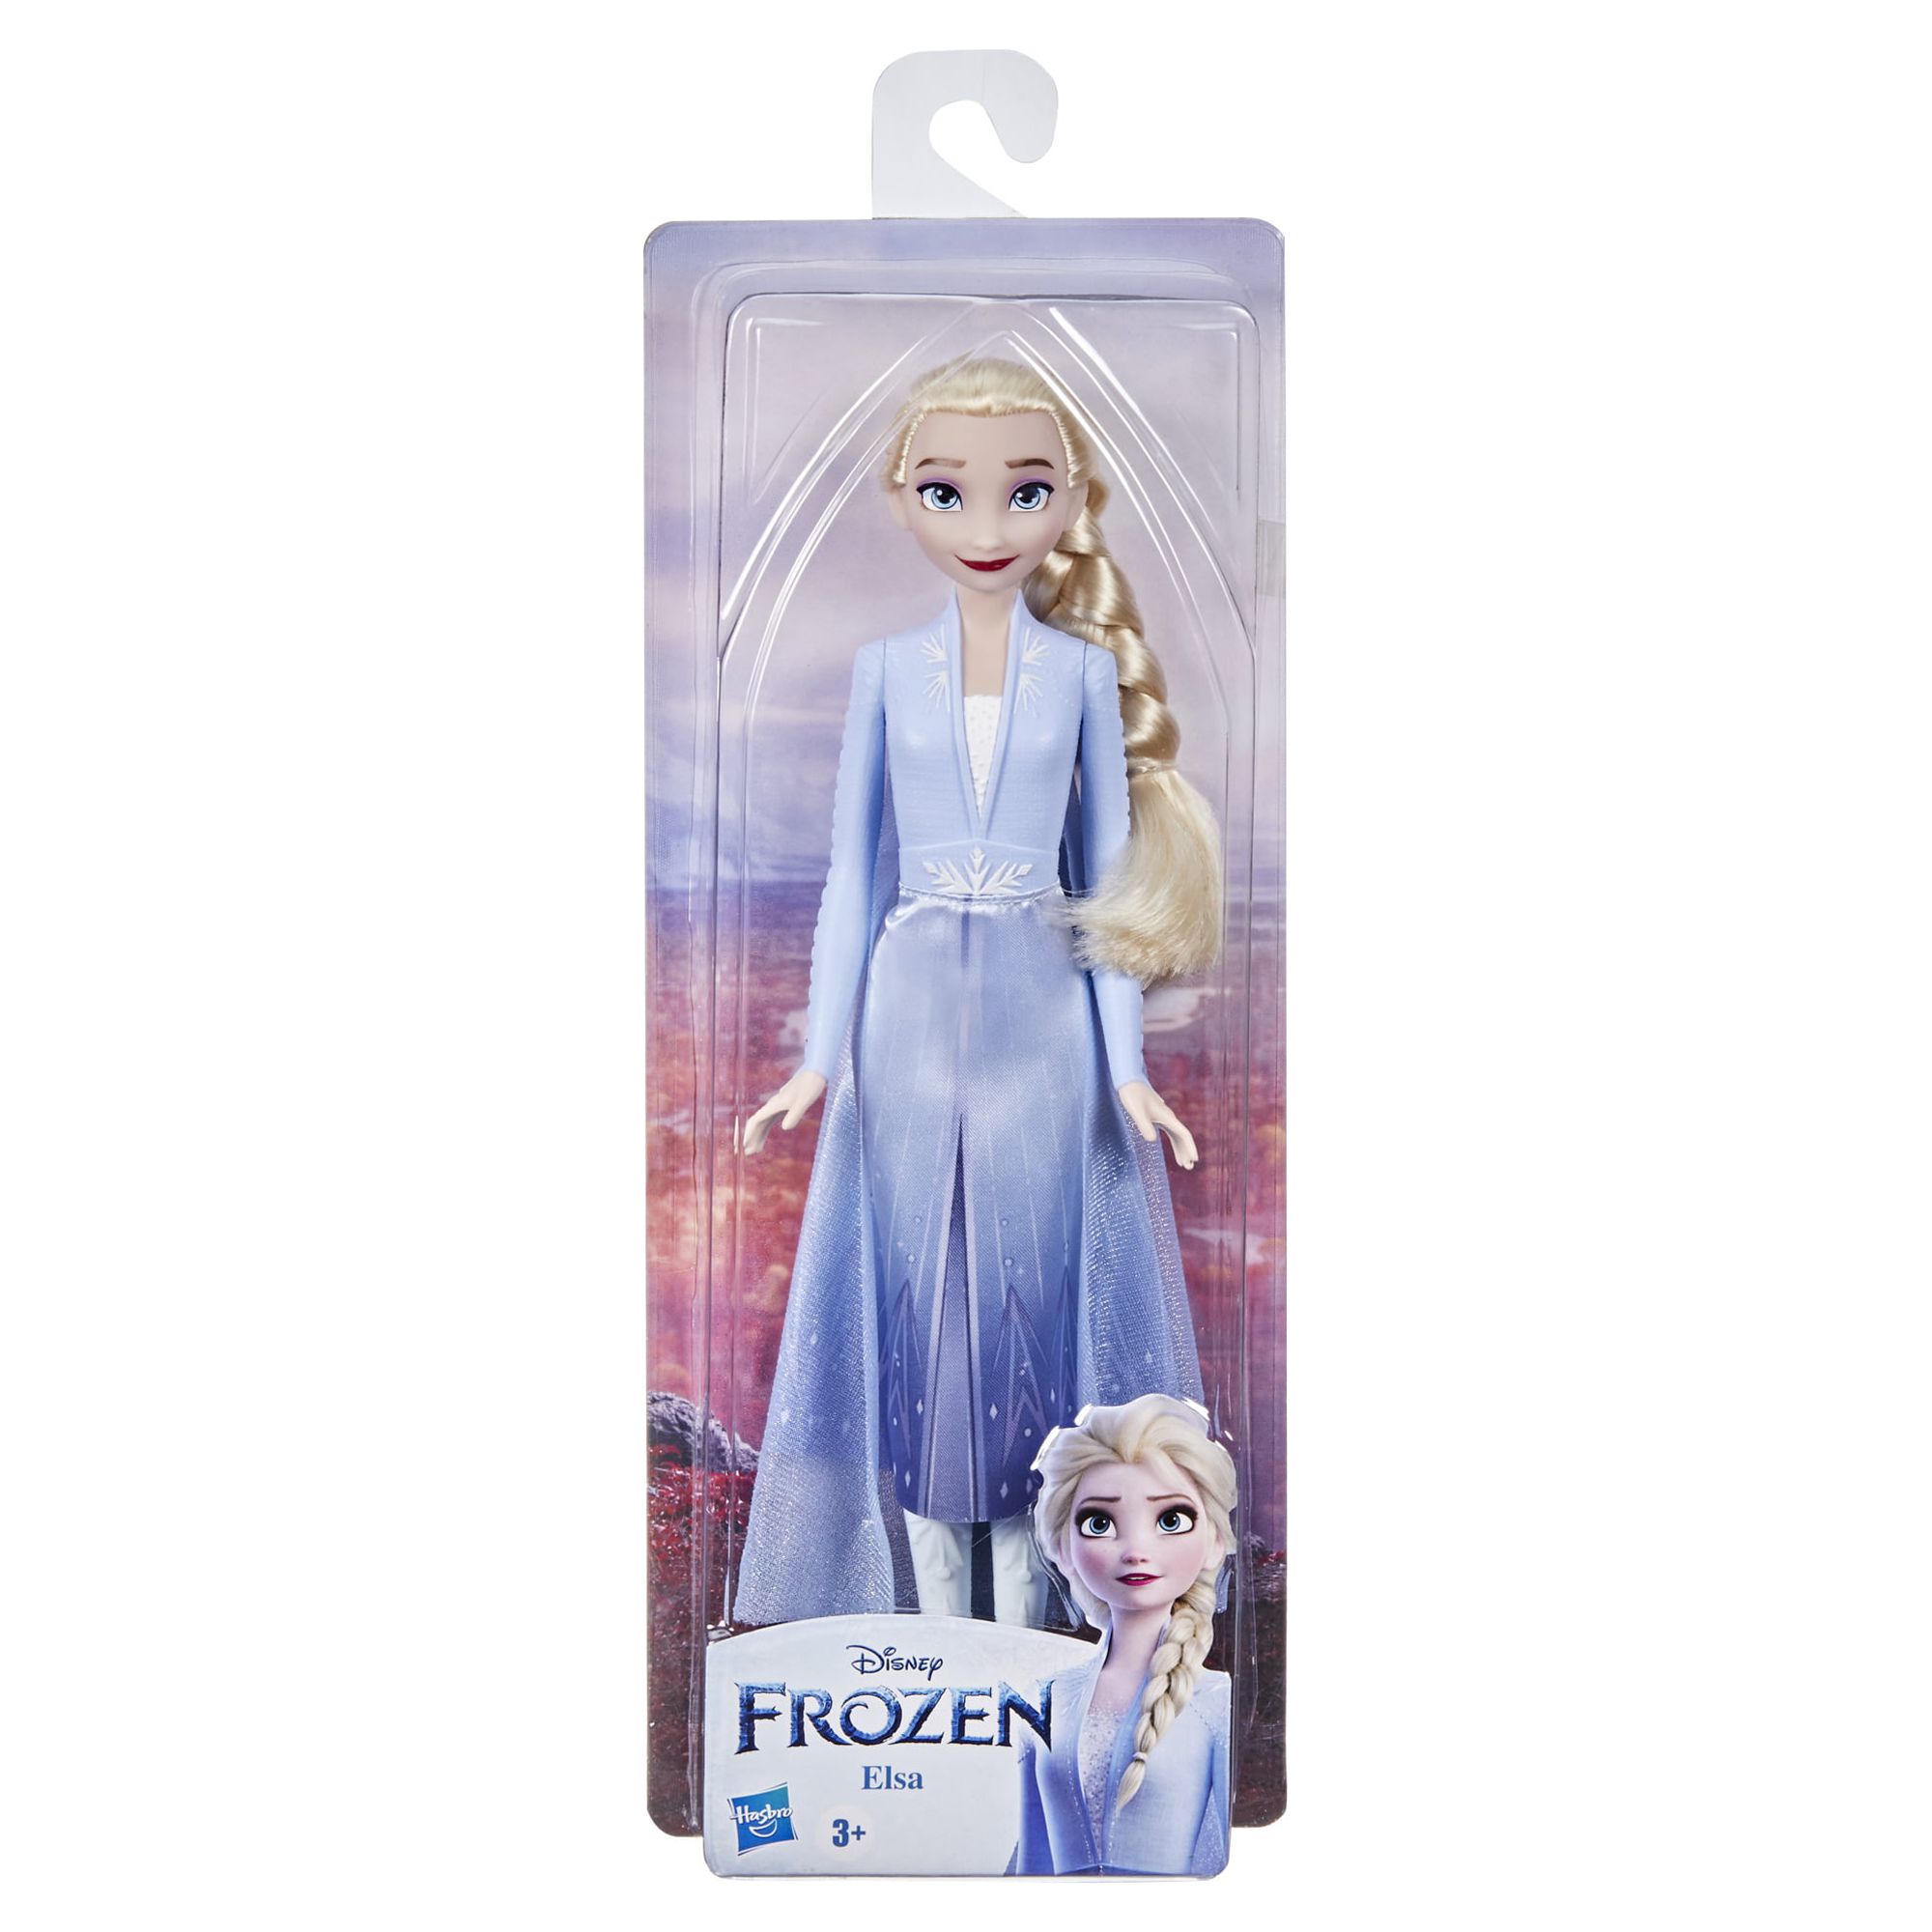 Disney's Frozen 2 Elsa Frozen Shimmer Fashion Doll, Accessories Included - image 2 of 11